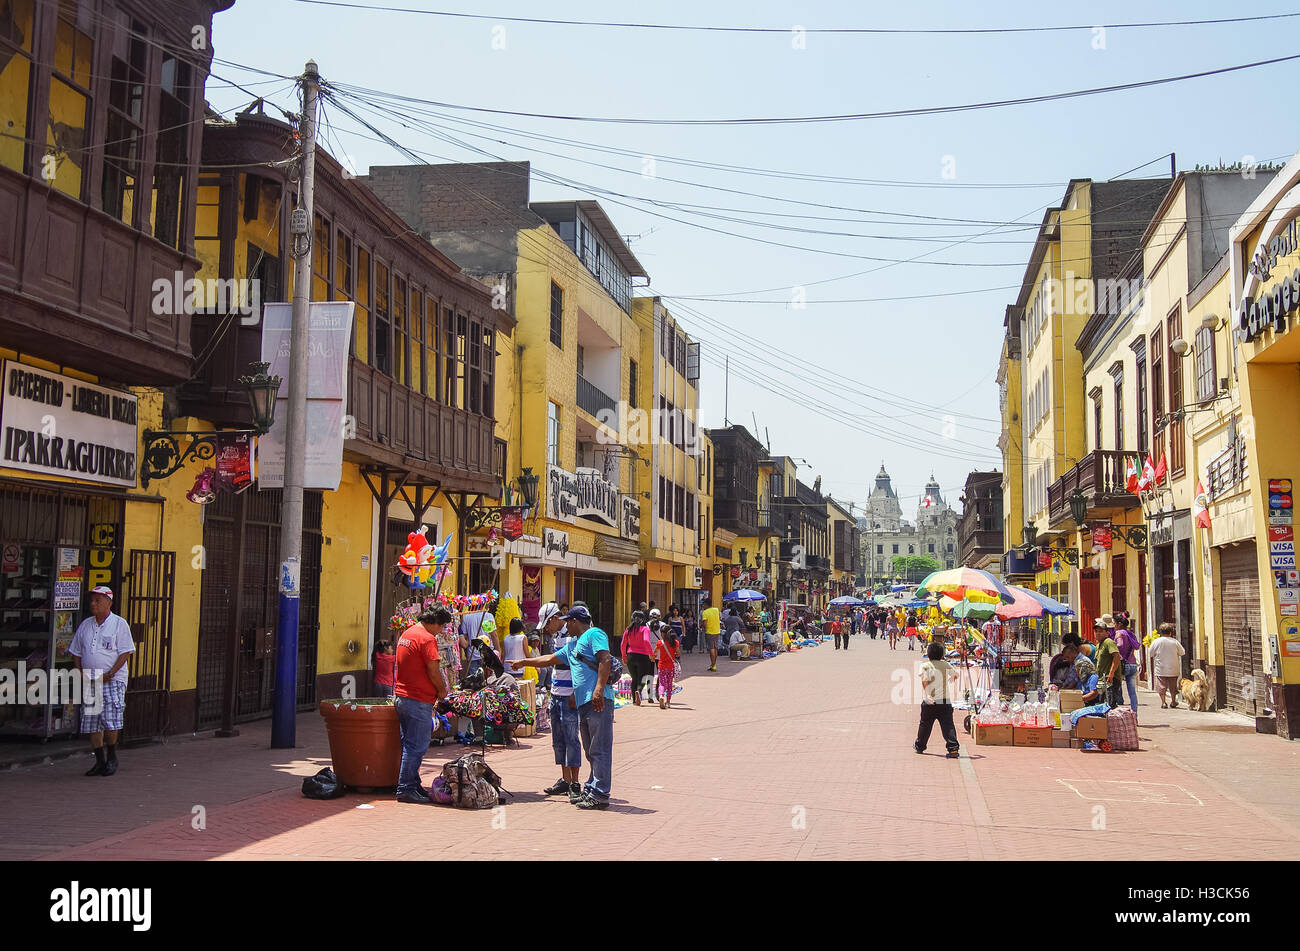 Lima, Petu -December 31, 2013: Street view of Lima old town with traditional colorful houses and wooden balcony. Stock Photo